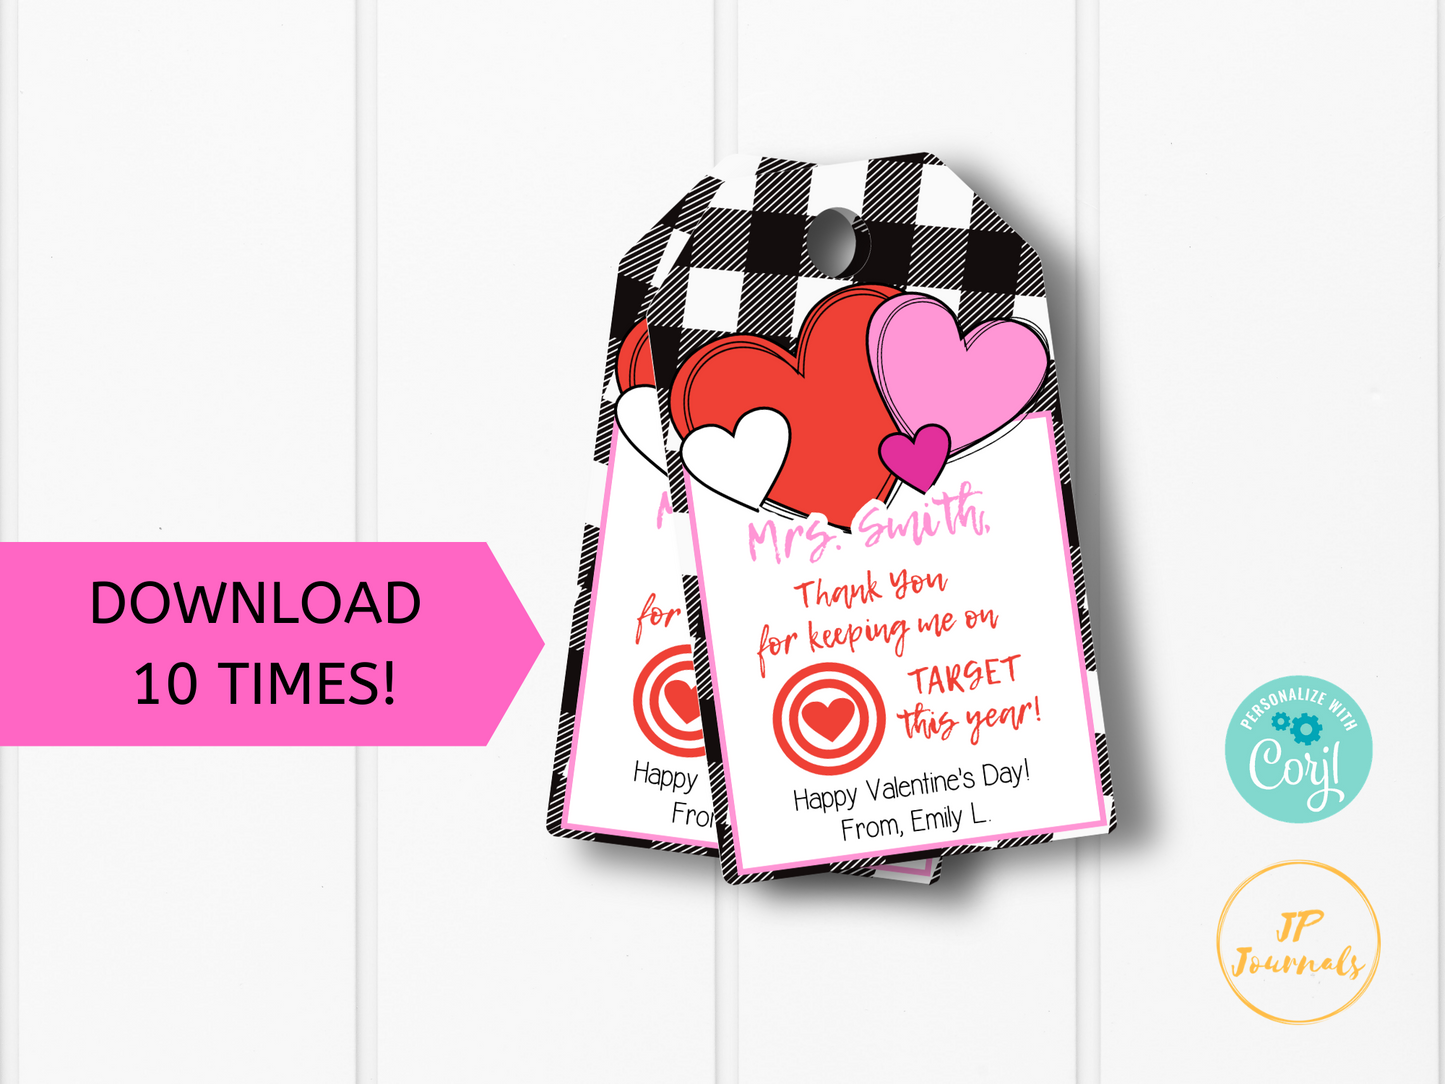 Printable Teacher Valentine's Day Gift Card Tag Label - Keeping Me On Target - Buffalo Plaid and Hearts - Edit Online Print at Home